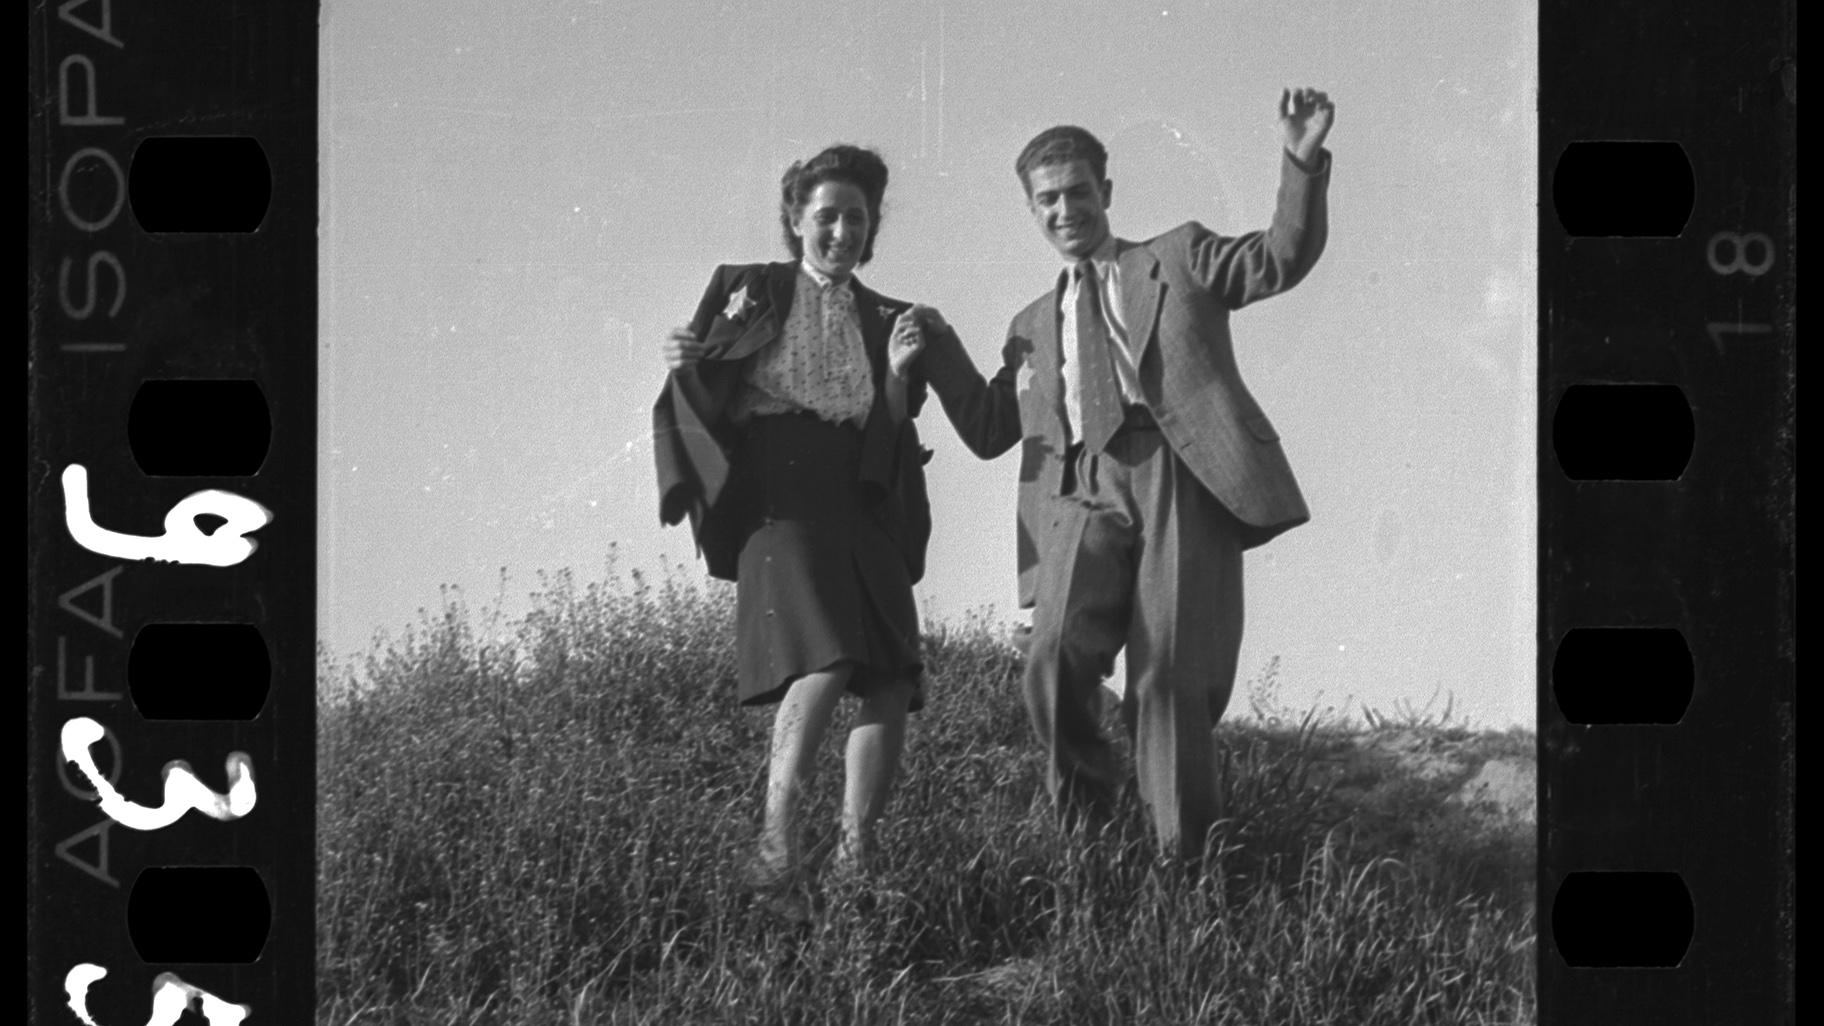 Ghetto residents happily strolling, 1940-1944. (Courtesy of the Art Gallery of Ontario, Gift of the Archive of Modern Conflict)